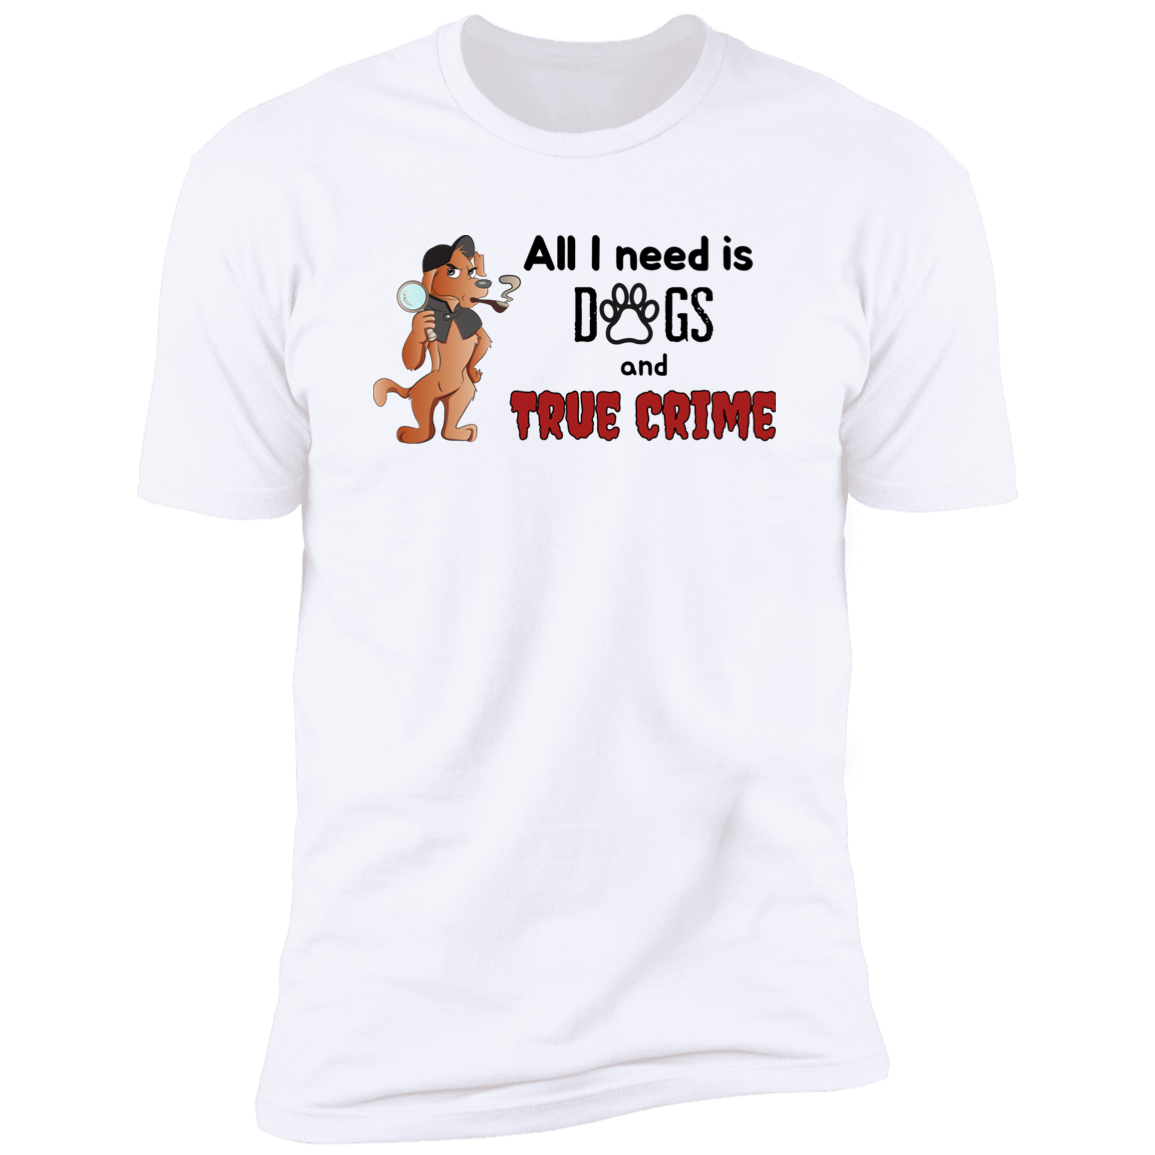 All I Need is Dogs and True Crime, Dog shirt for humas, in white